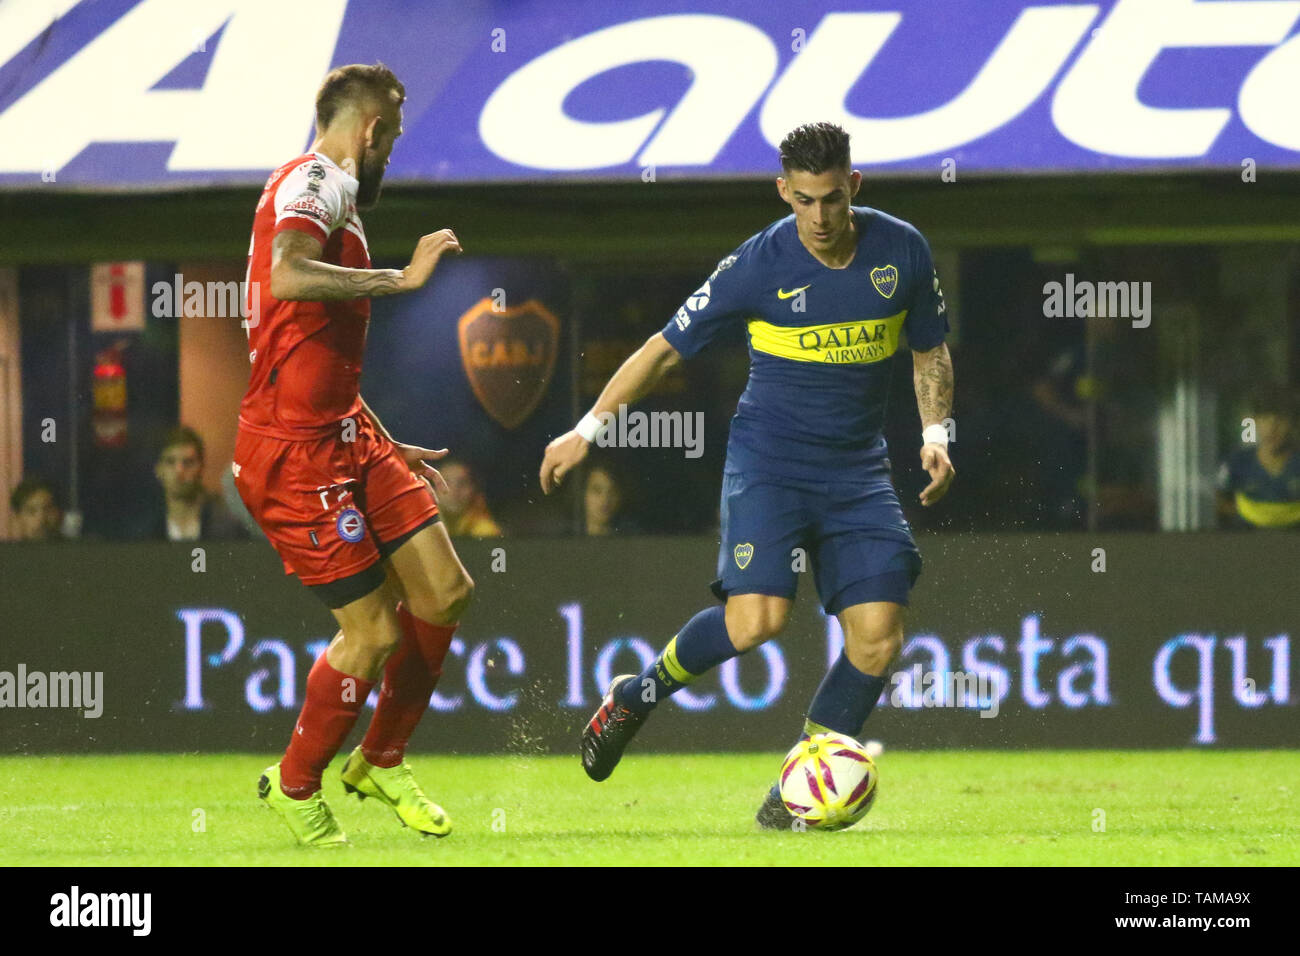 BUENOS AIRES, 26.05.2019: Cristian Pavon during the match between Boca Juniors and Argentinos Juniors and for semifinal match of Copa Superliga Argent Stock Photo